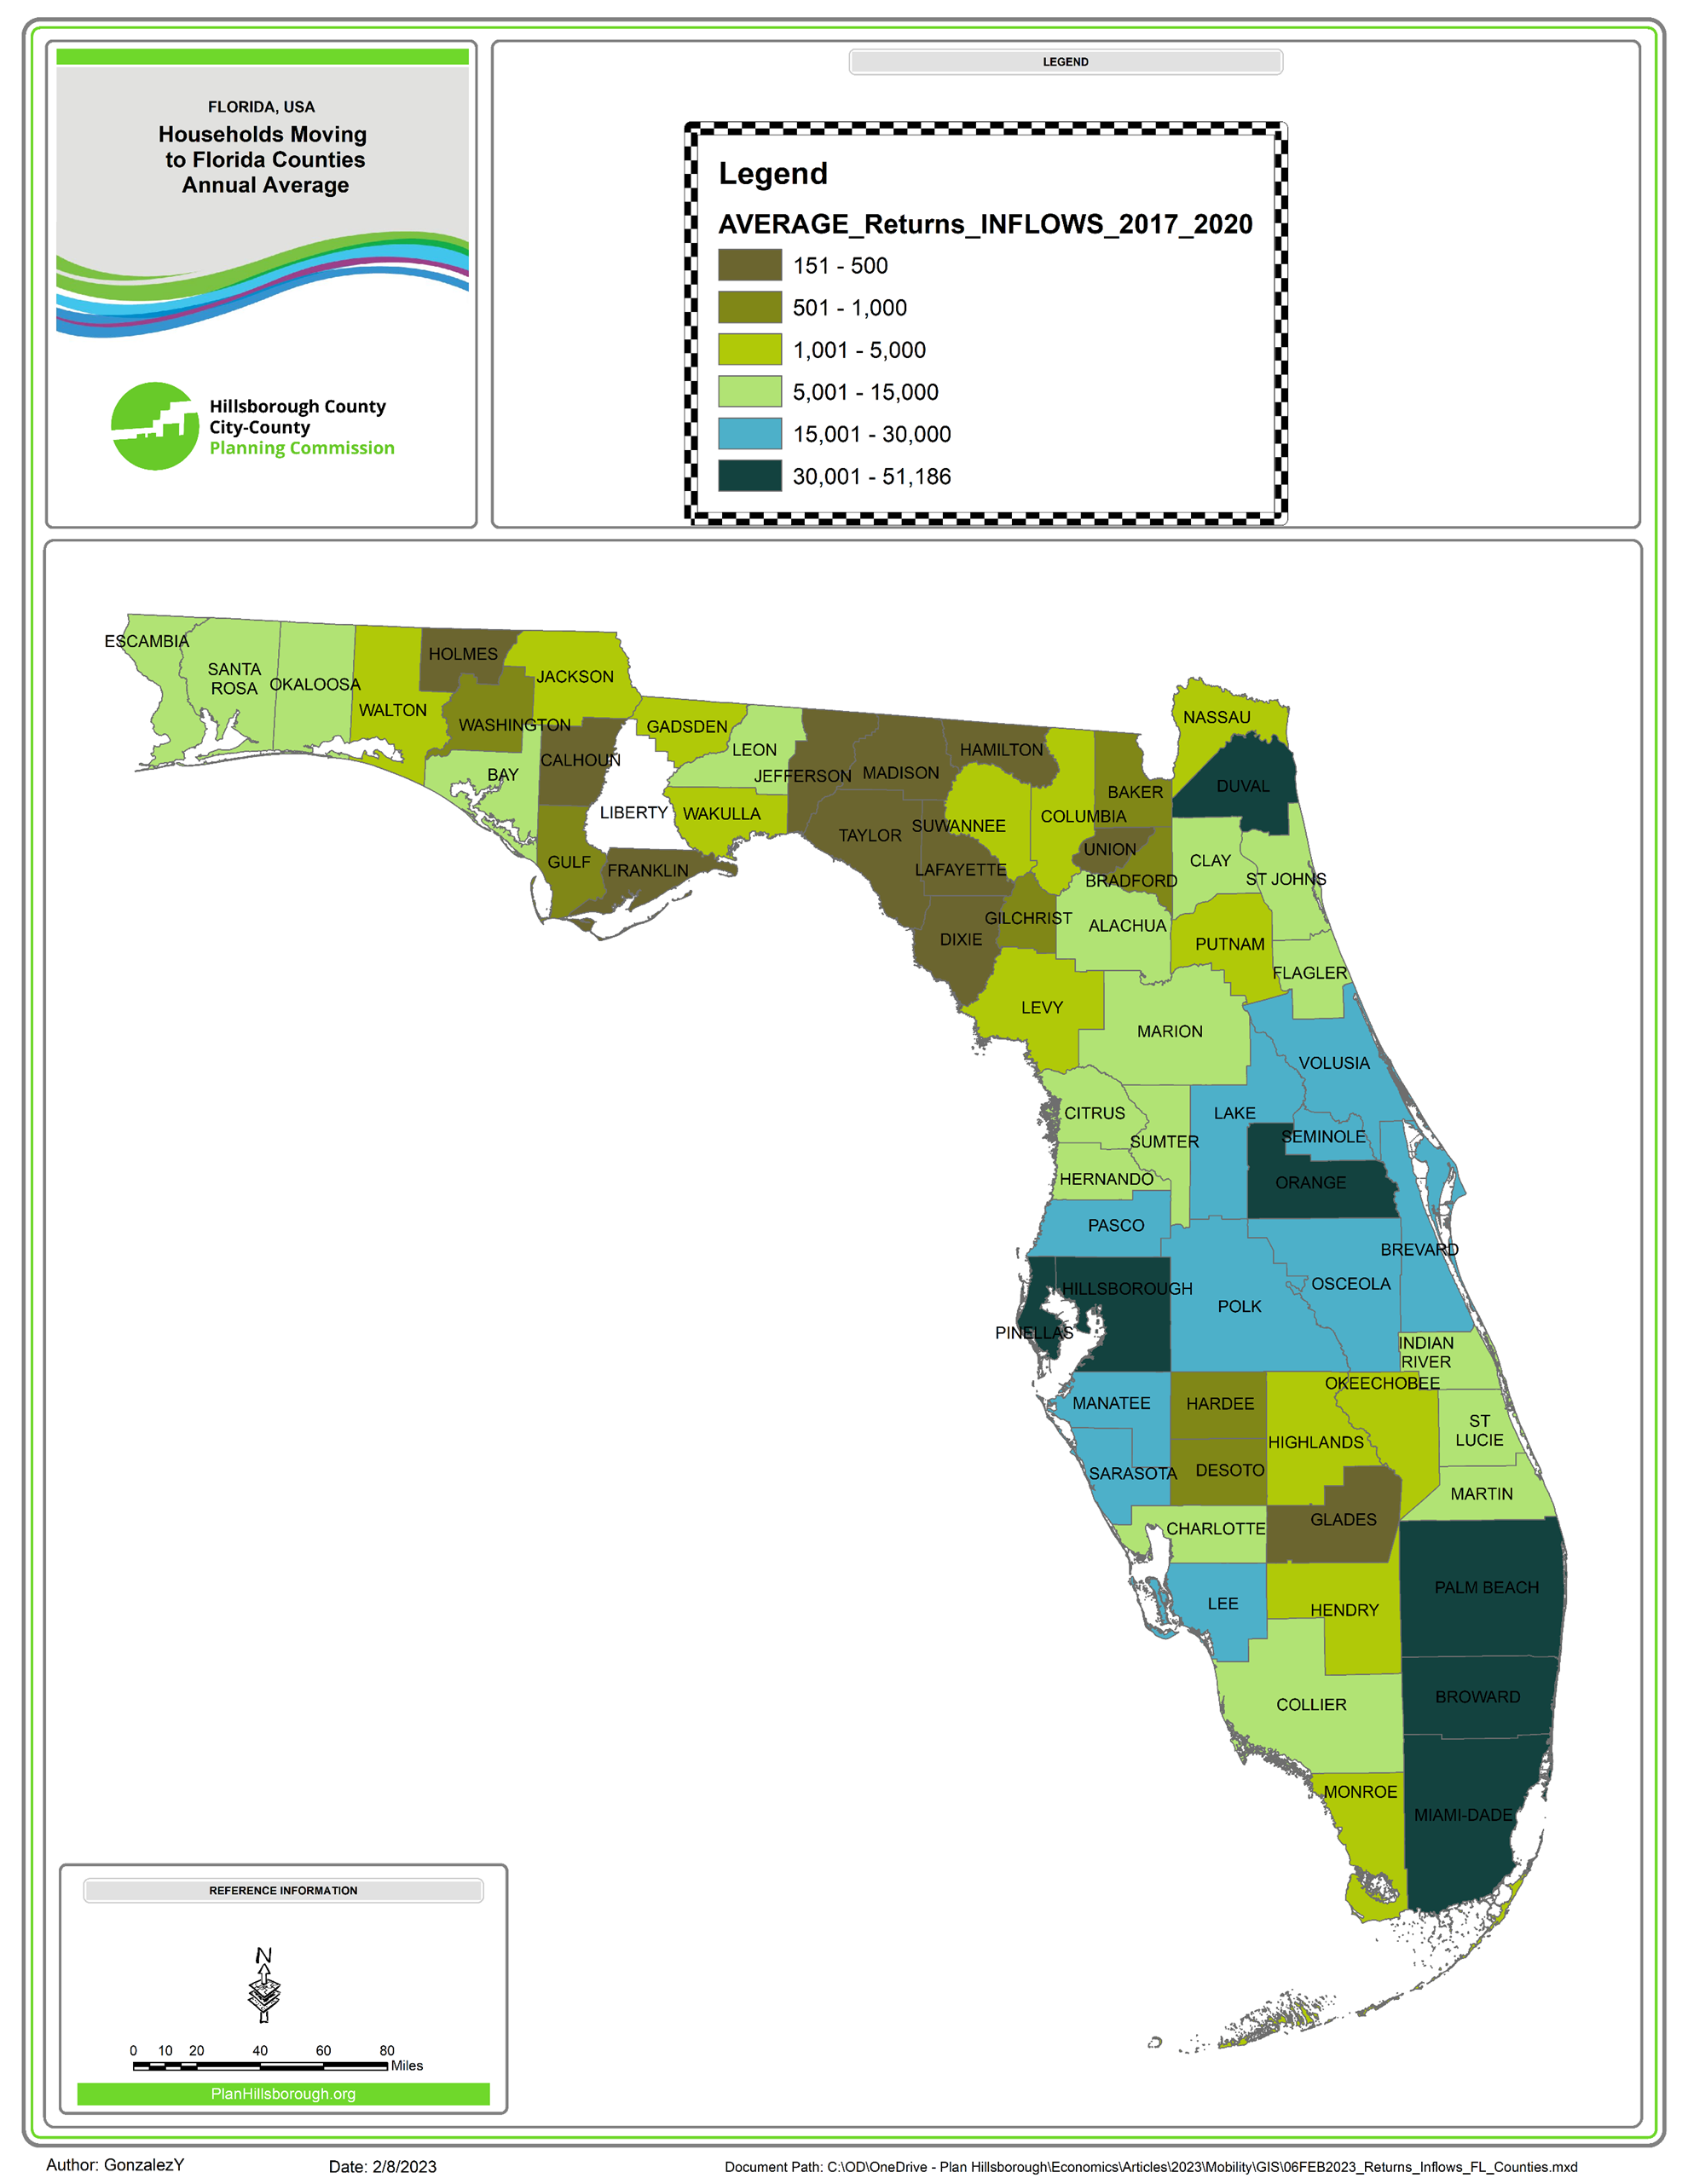 Map shows all Florida Counties. For each county, the map indicates how many average new households the county received. Hillsborough, Orange, and Pinellas receive over 30,000 new households per year.